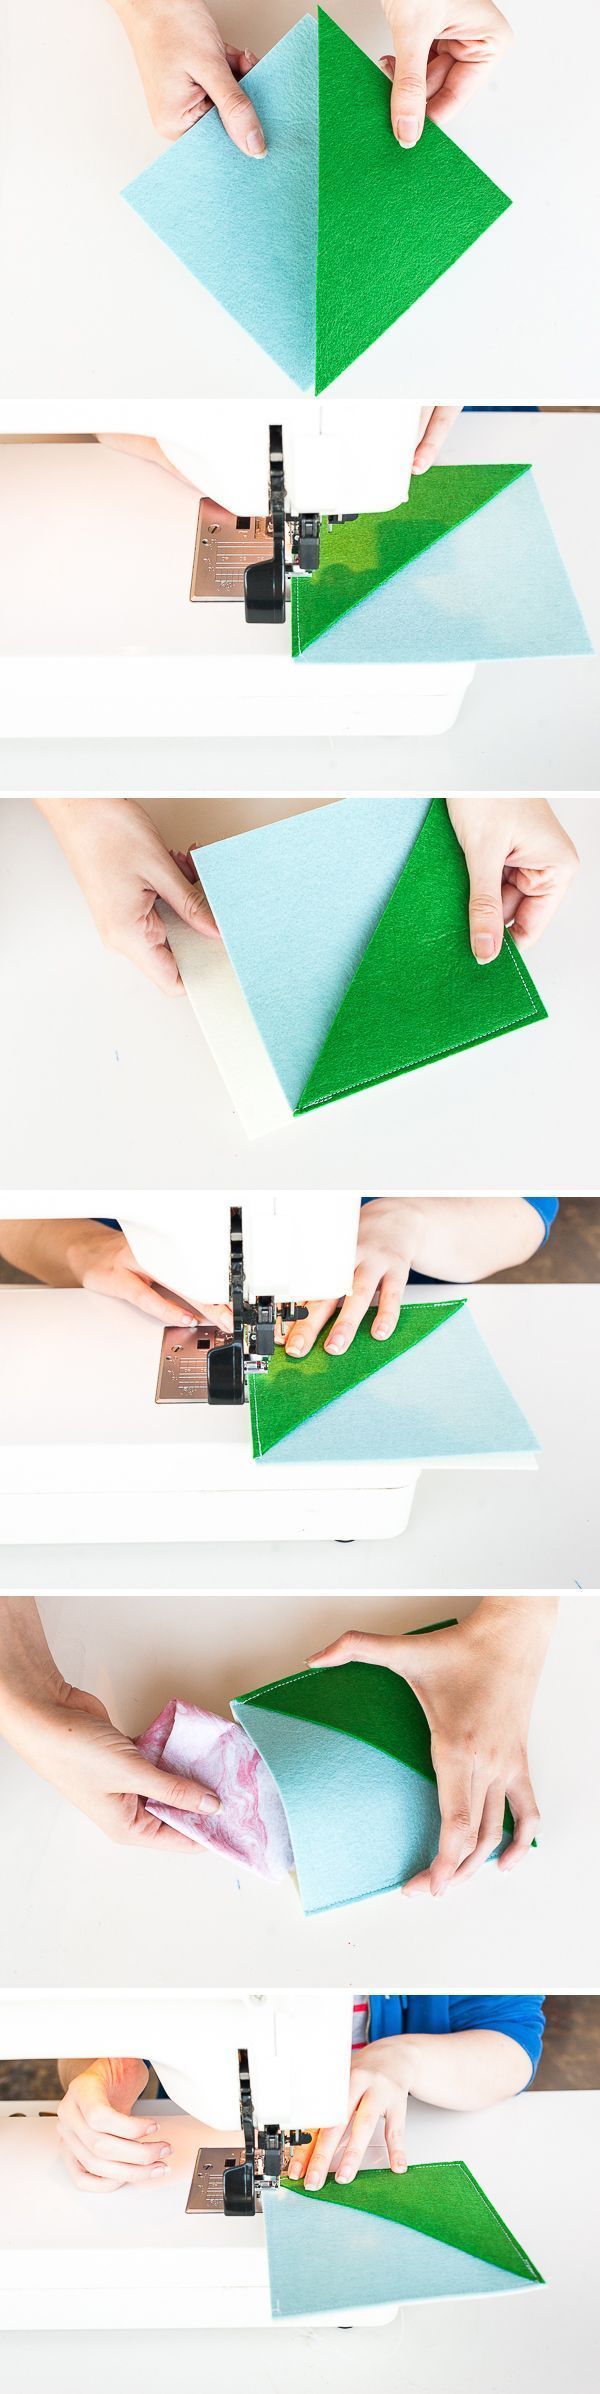 How to Make Color Blocked Sewn Felt Pouches for Presents